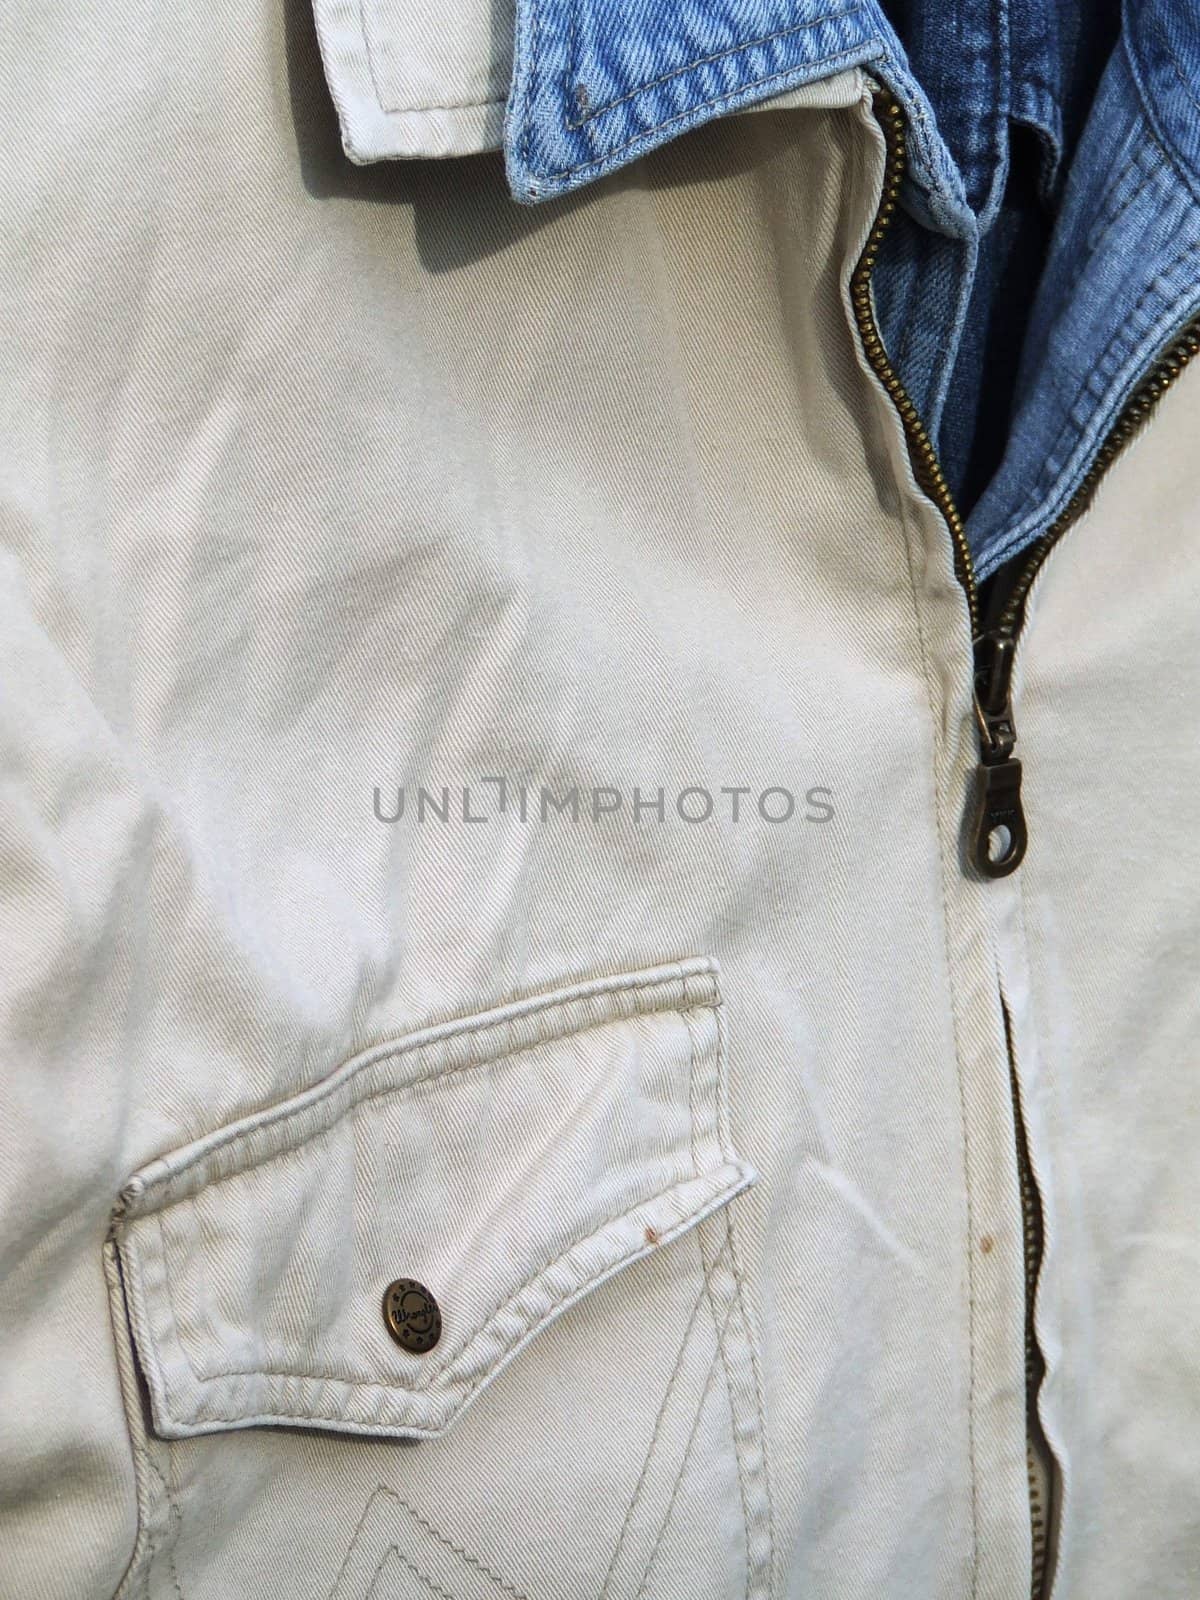 The photo shows the piece of denim shirts